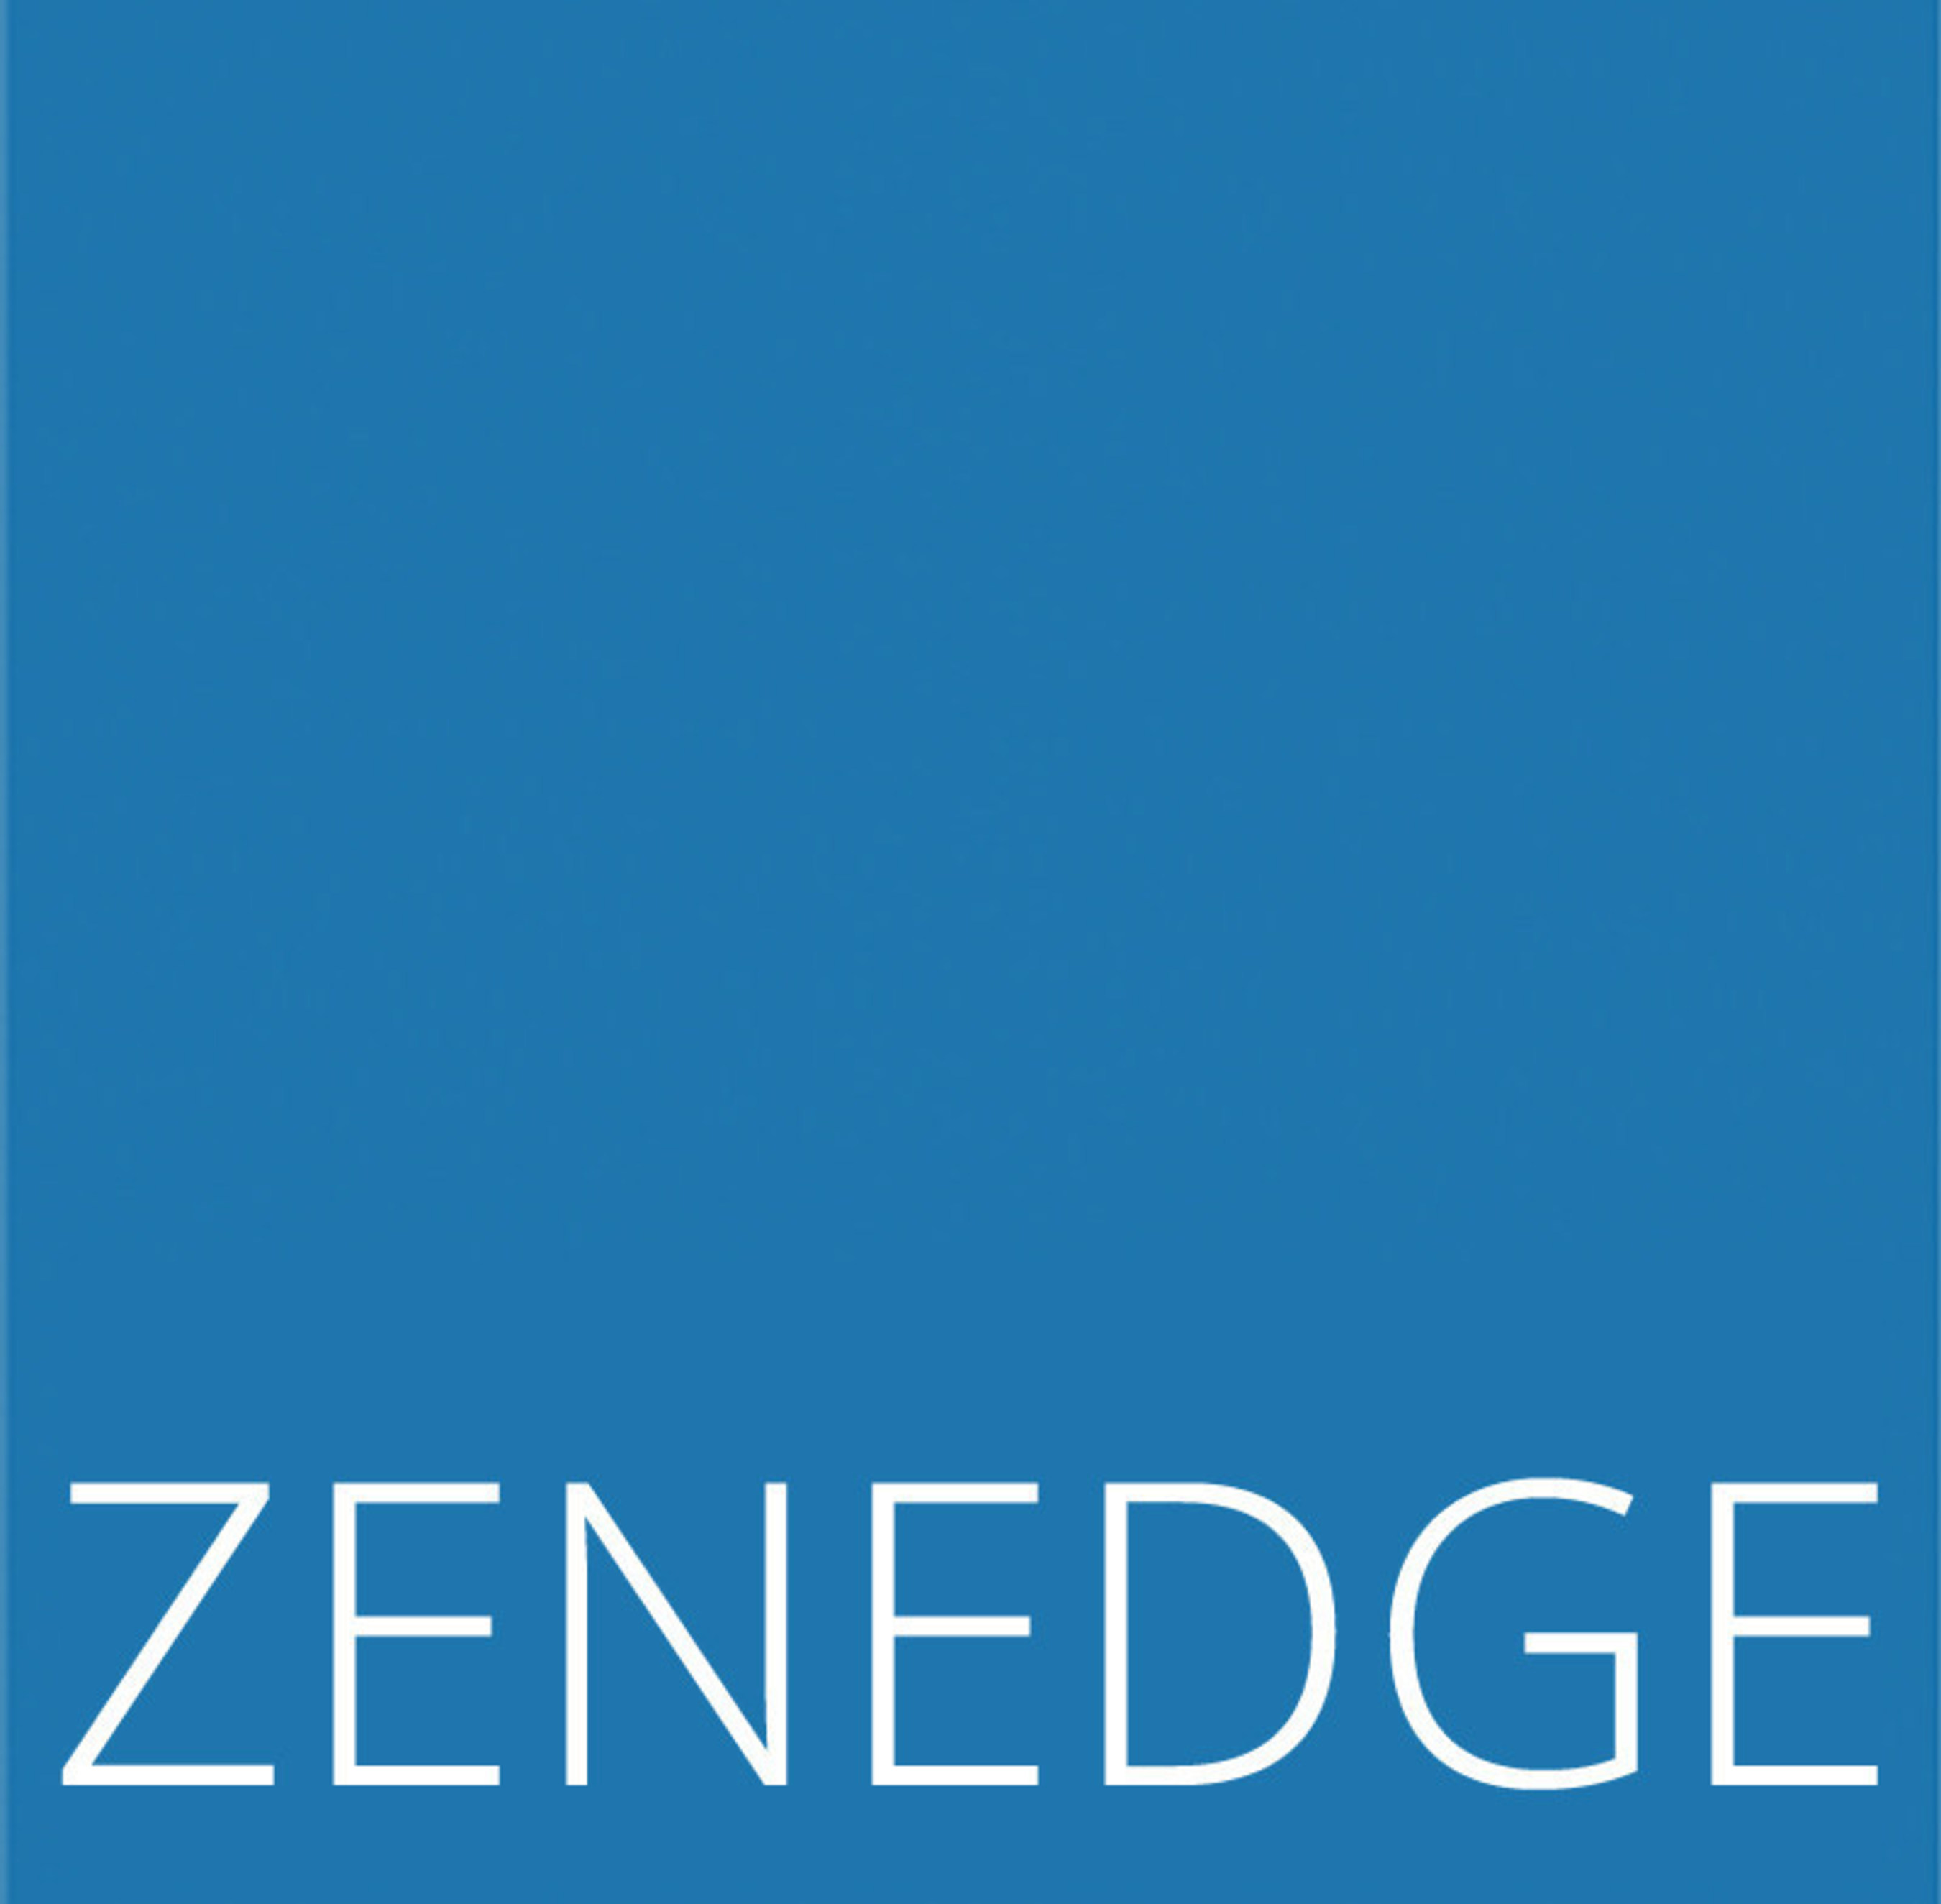 Zenedge. Web Application Security & DDoS Protection.